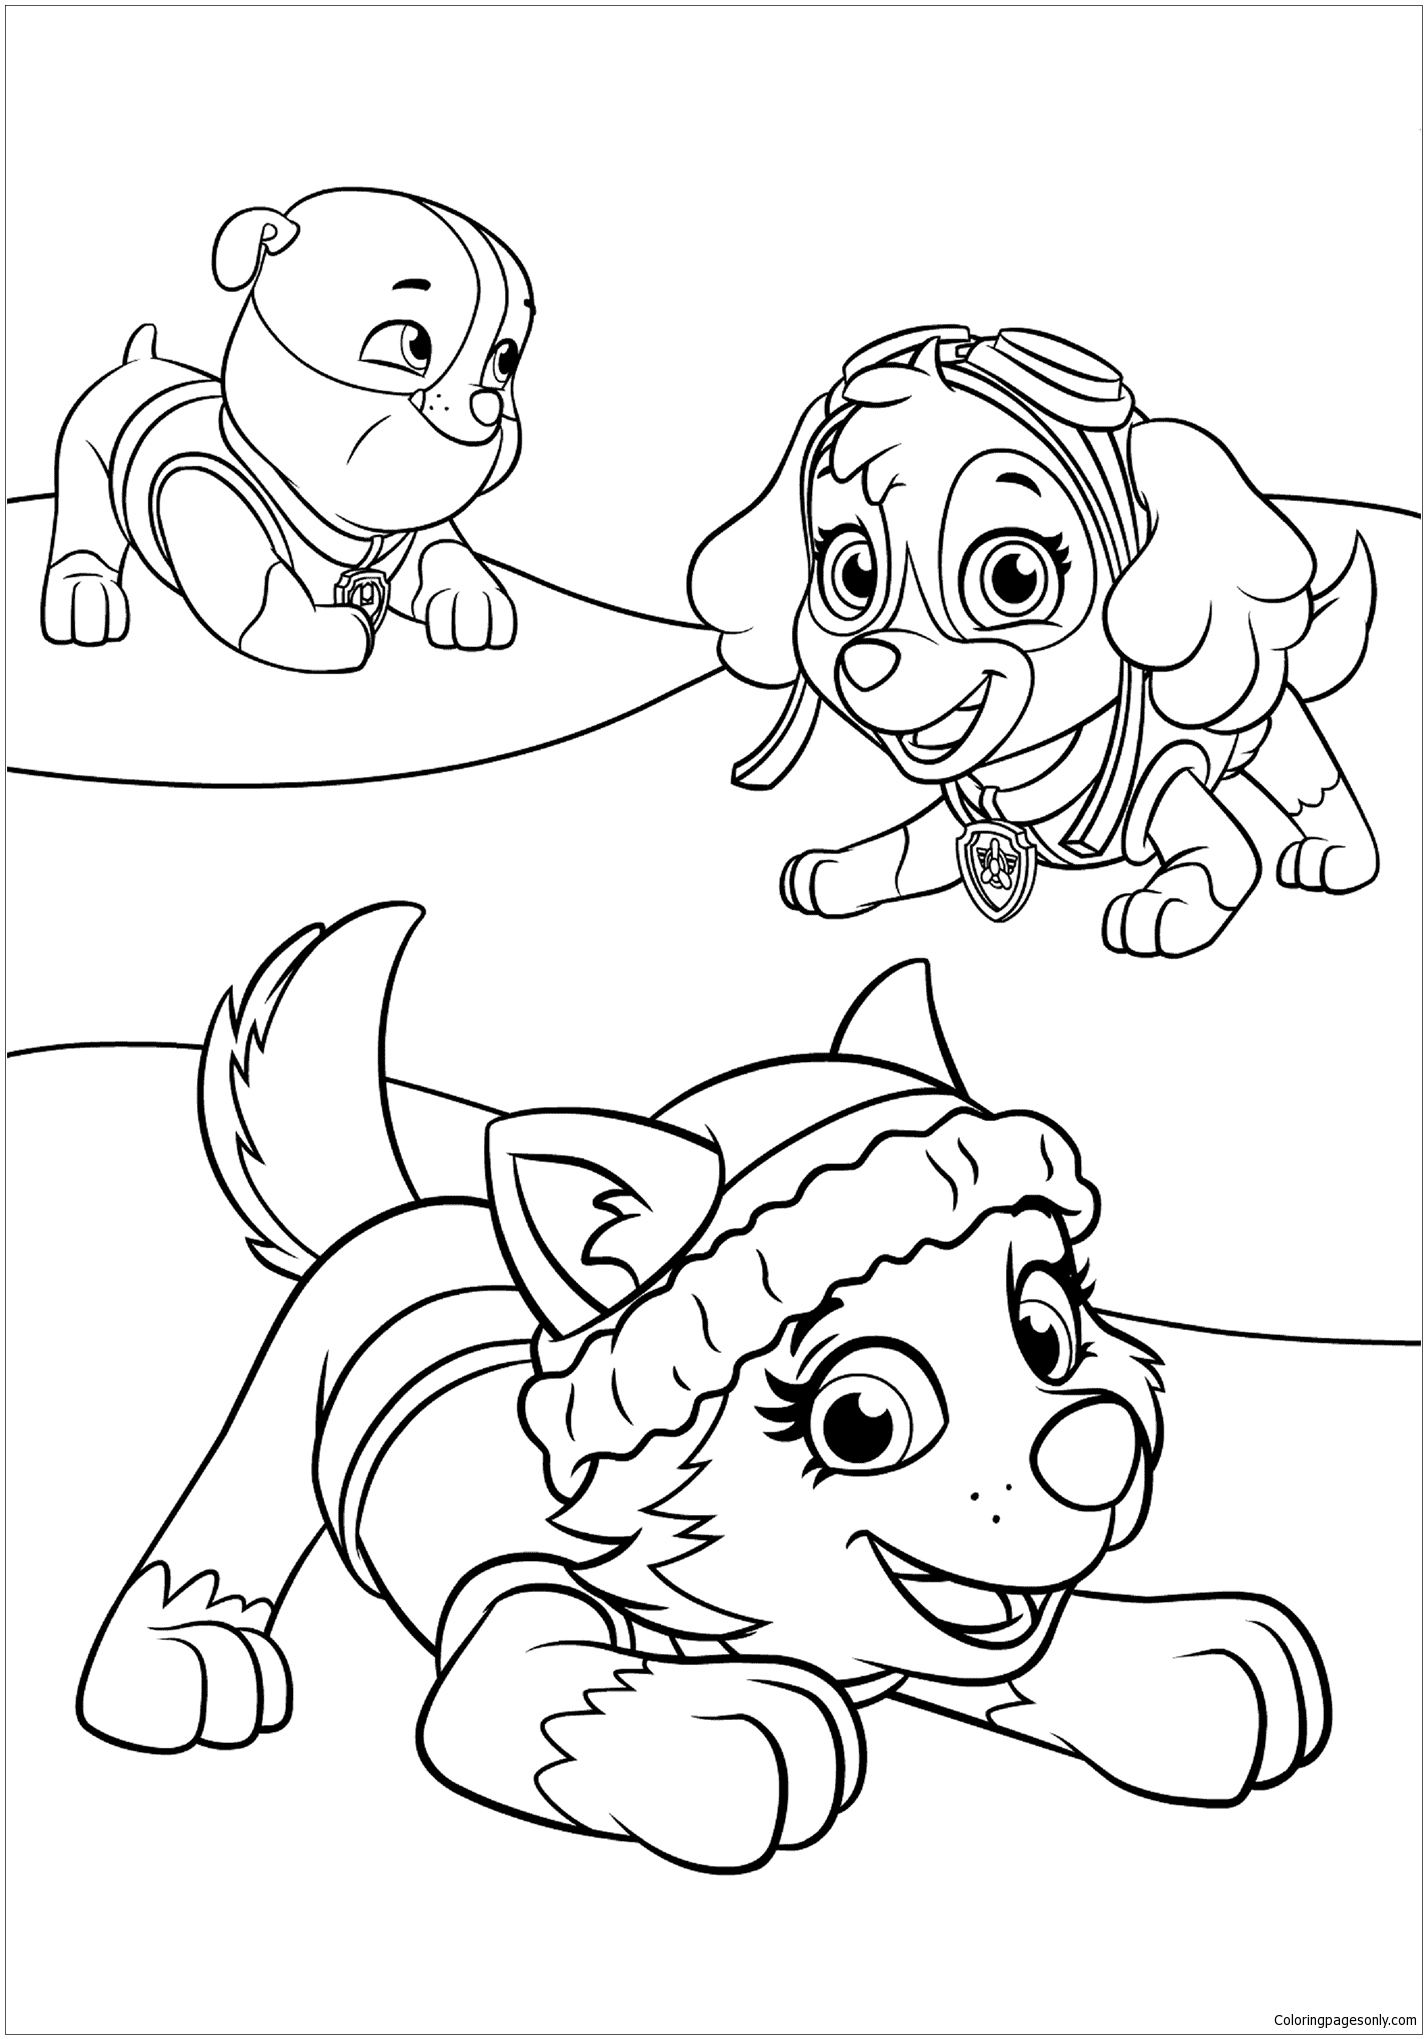 Paw Patrol 20 Coloring Page - Free Coloring Pages Online